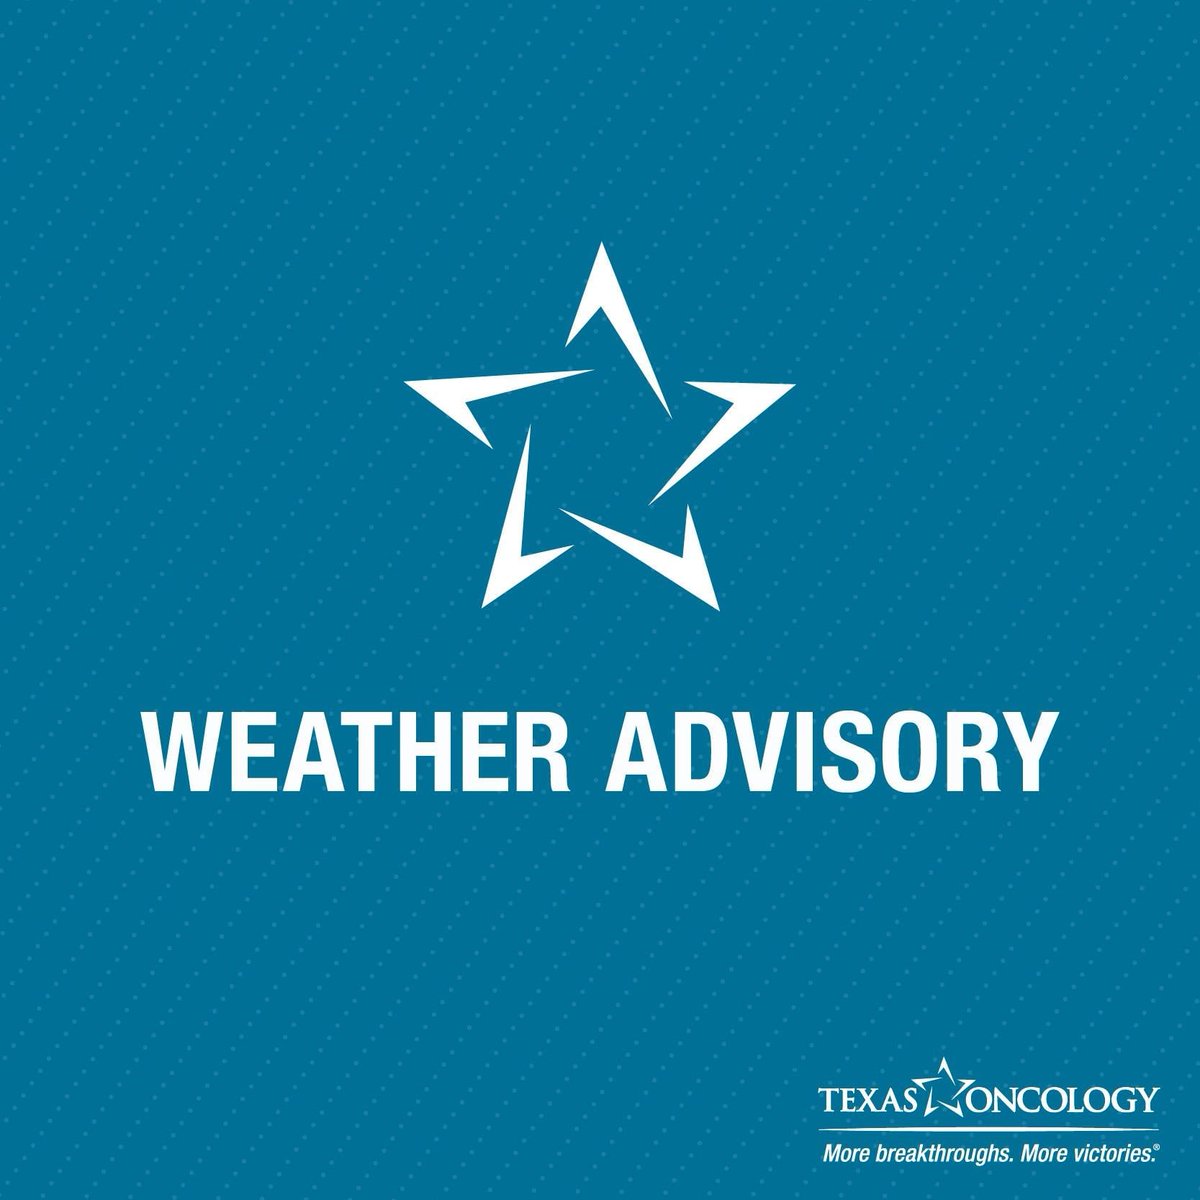 Due to severe winter weather, some Texas Oncology locations will be impacted. To stay updated on delayed openings or closures, please visit: texasoncology.com/important-noti…